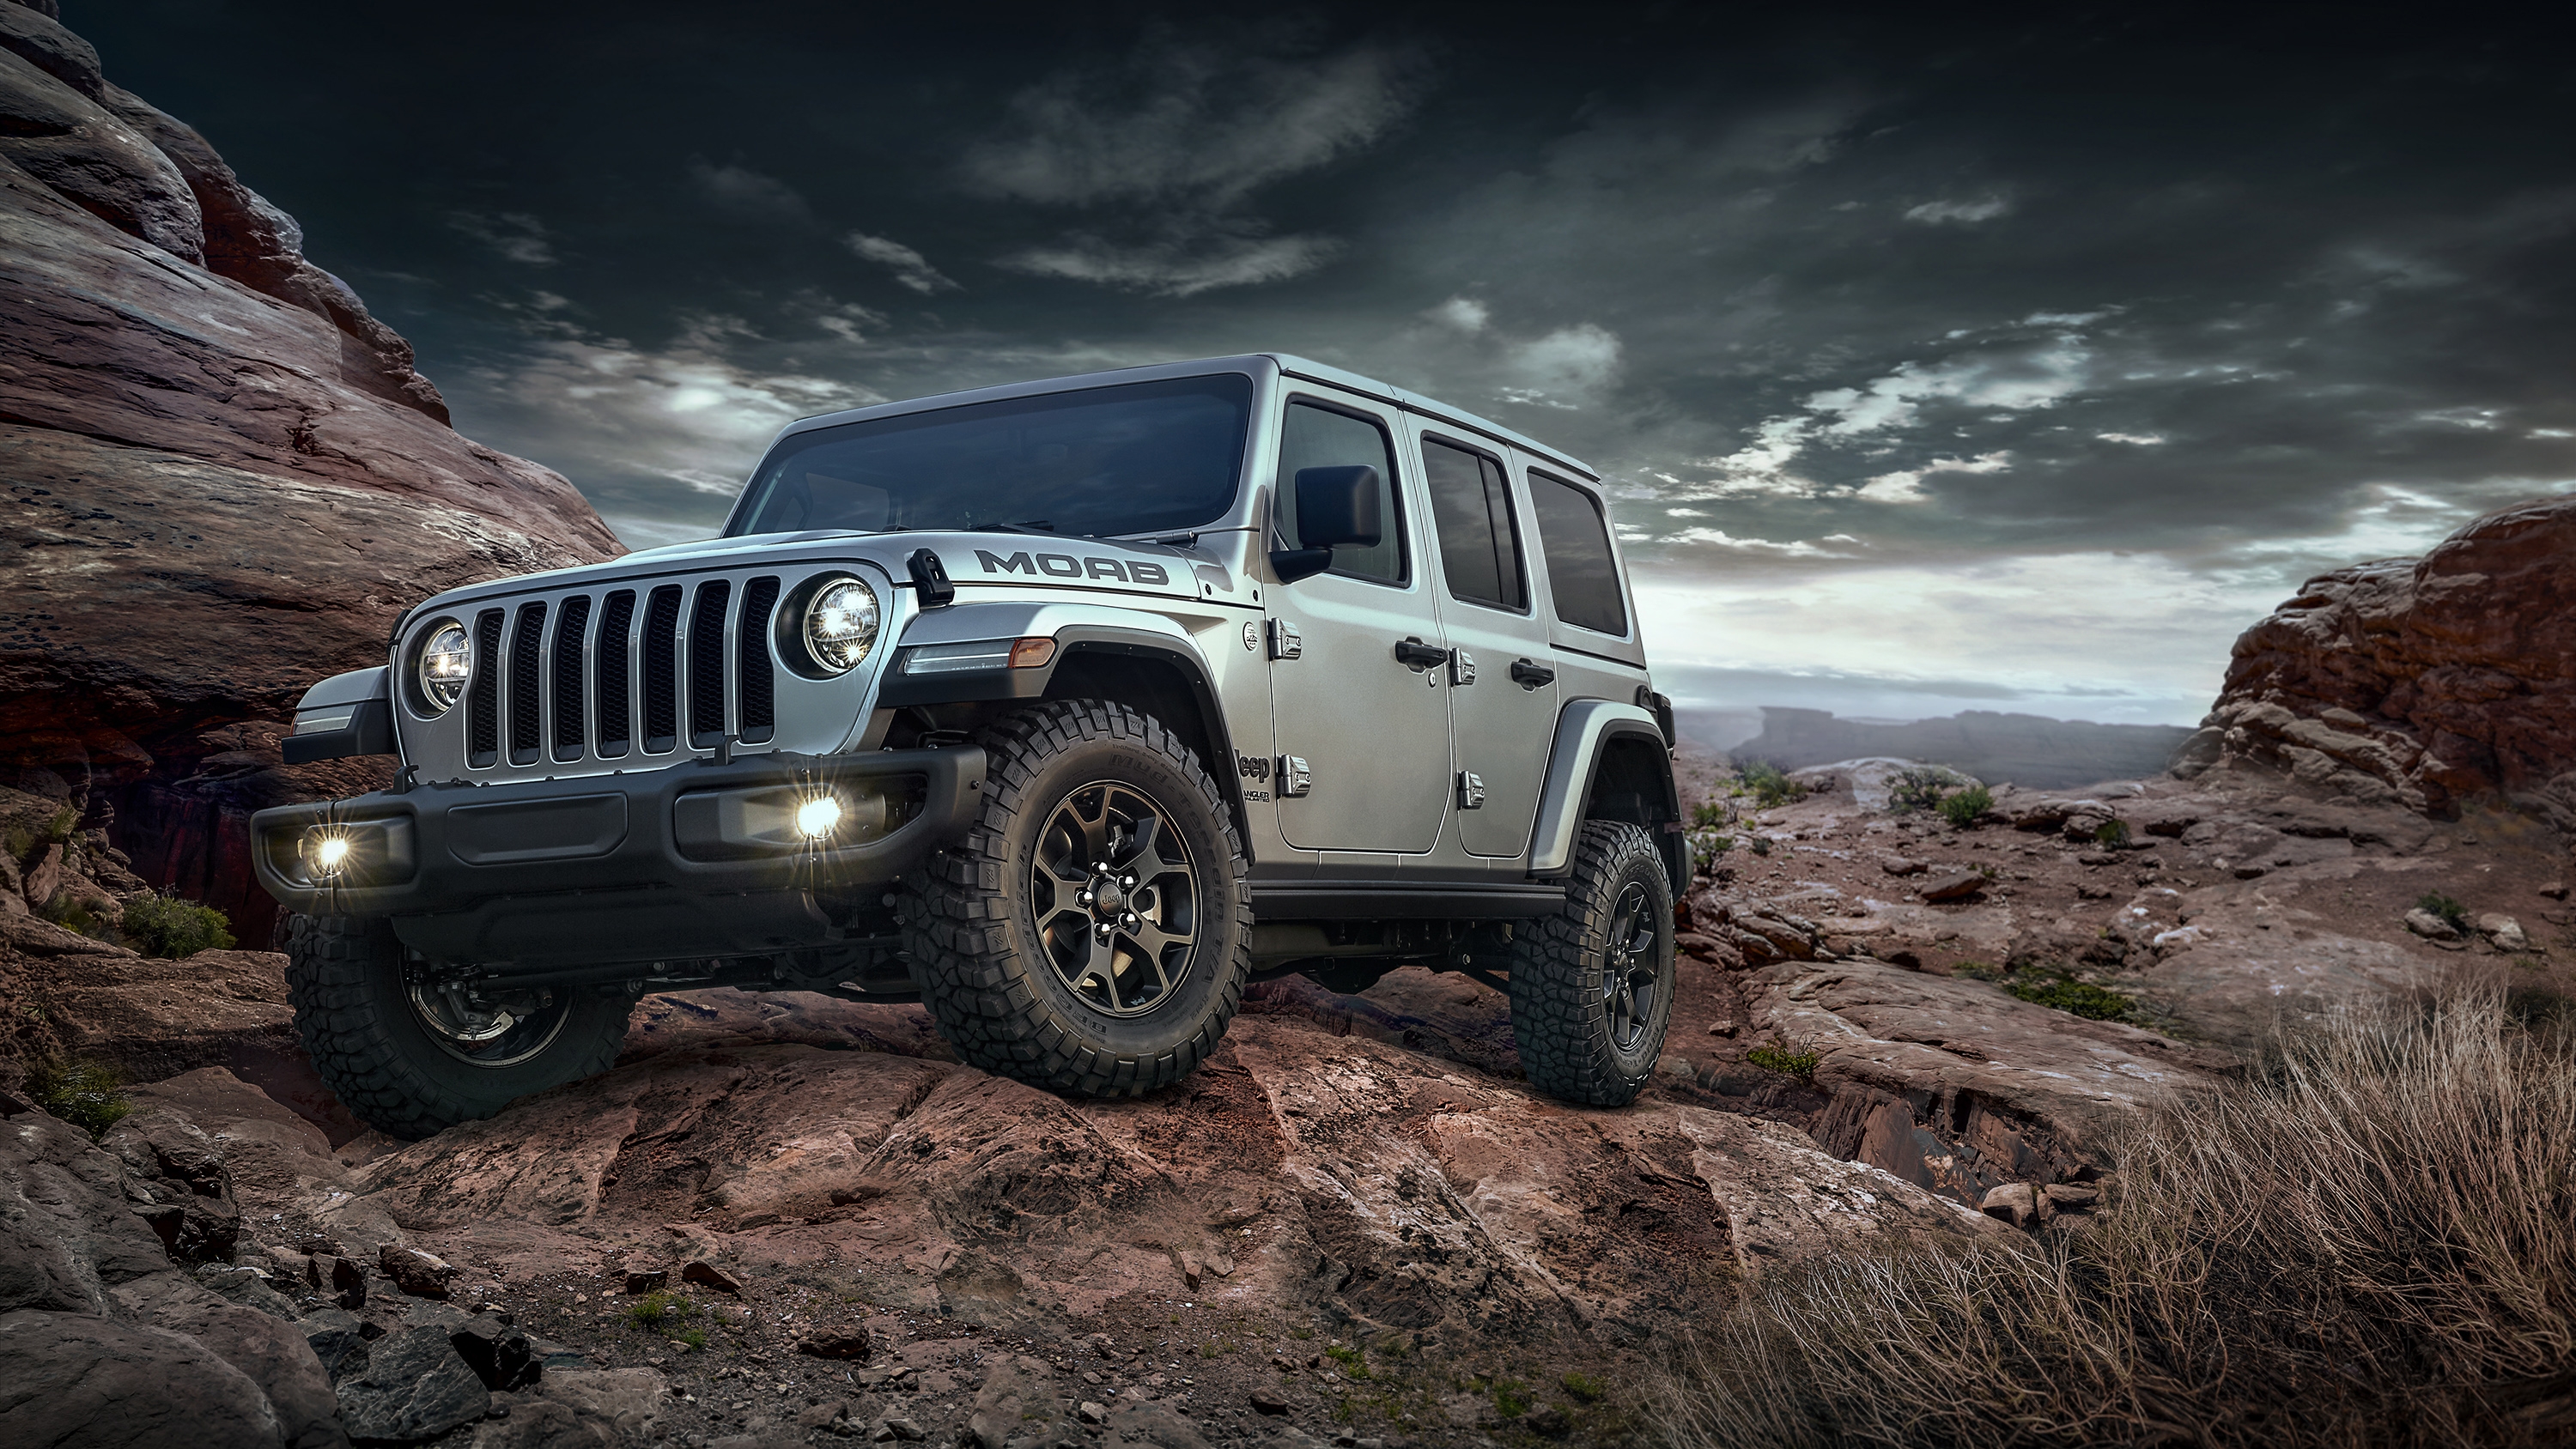 Free photo The new Jeep Wrangler goes off-road in the mountains